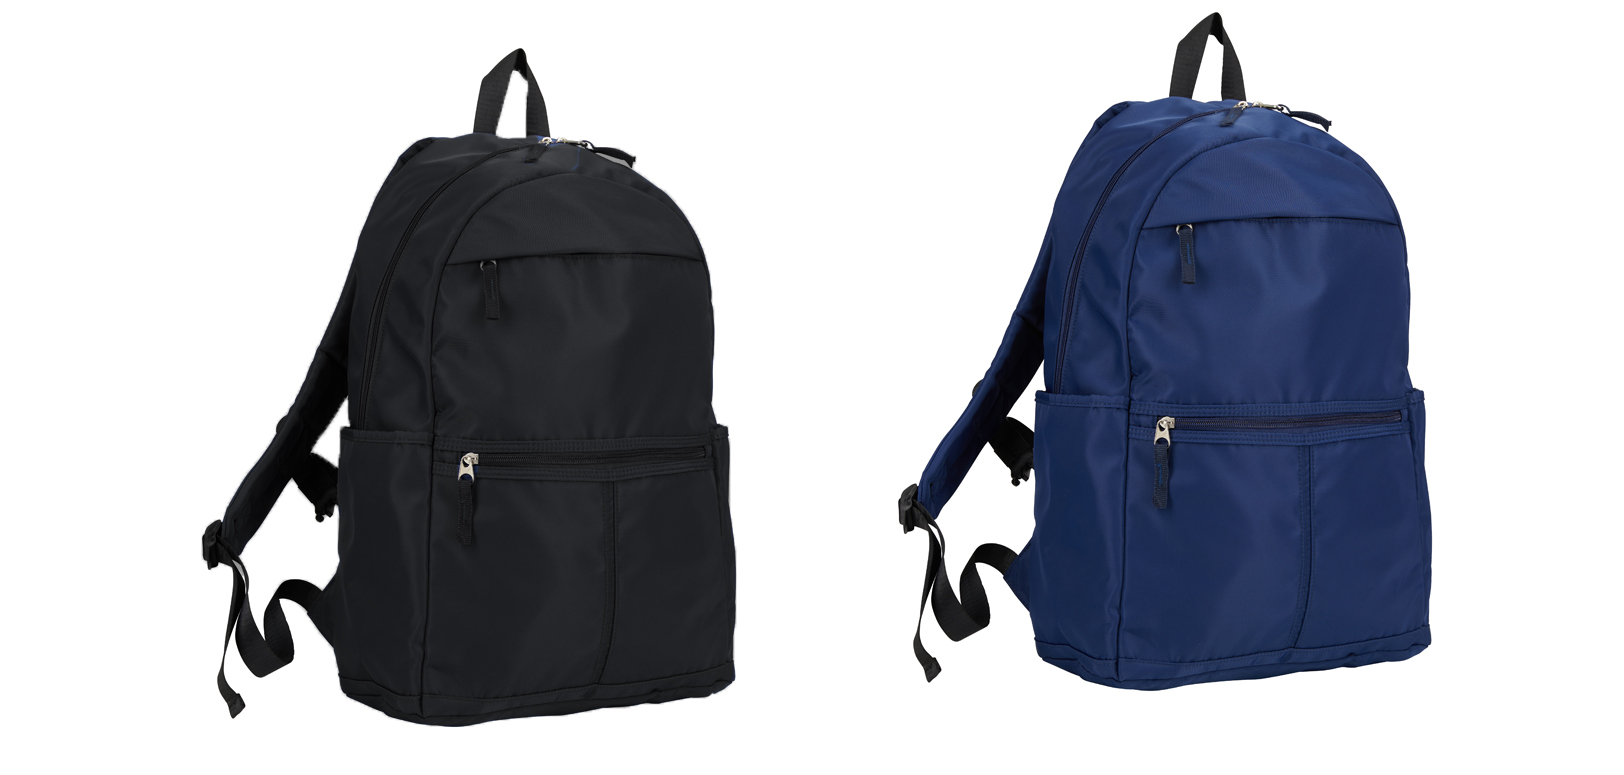 ''19'''' Solid BACKPACKs w/ Cargo & Zip-Up Pockets - Choose Your Color(s)''